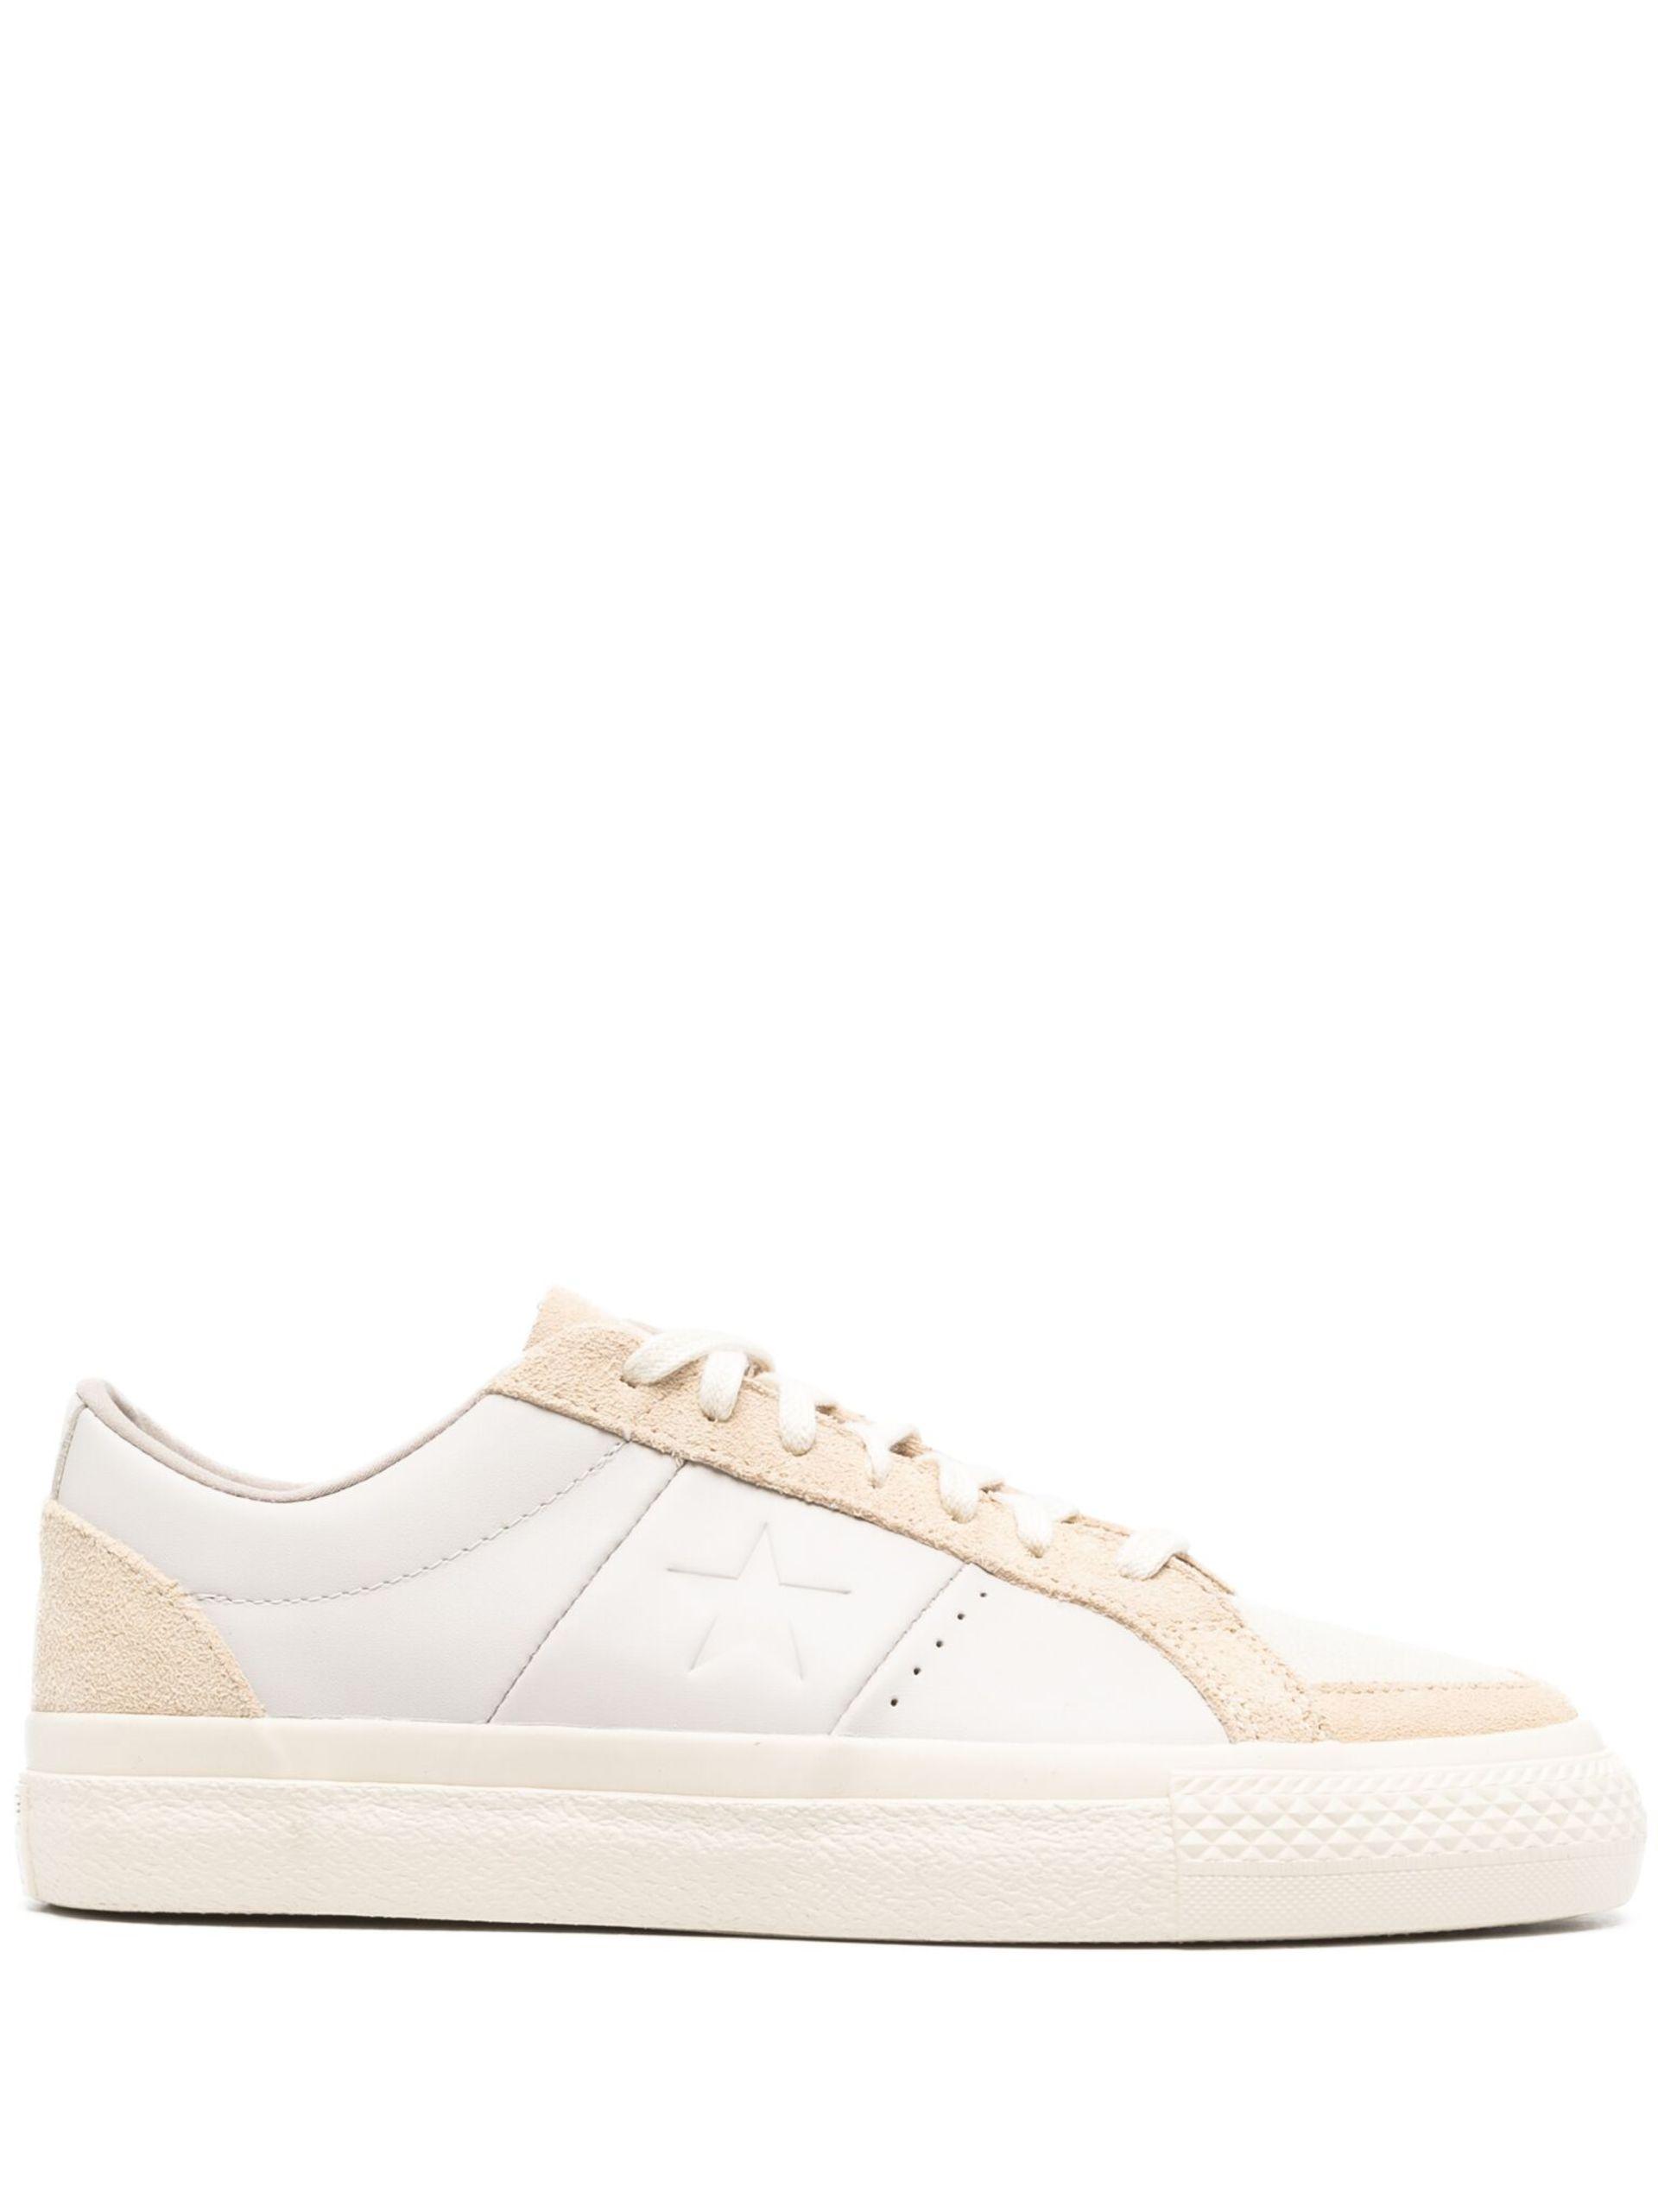 Converse X South Of Houston Low-top Sneakers in White | Lyst